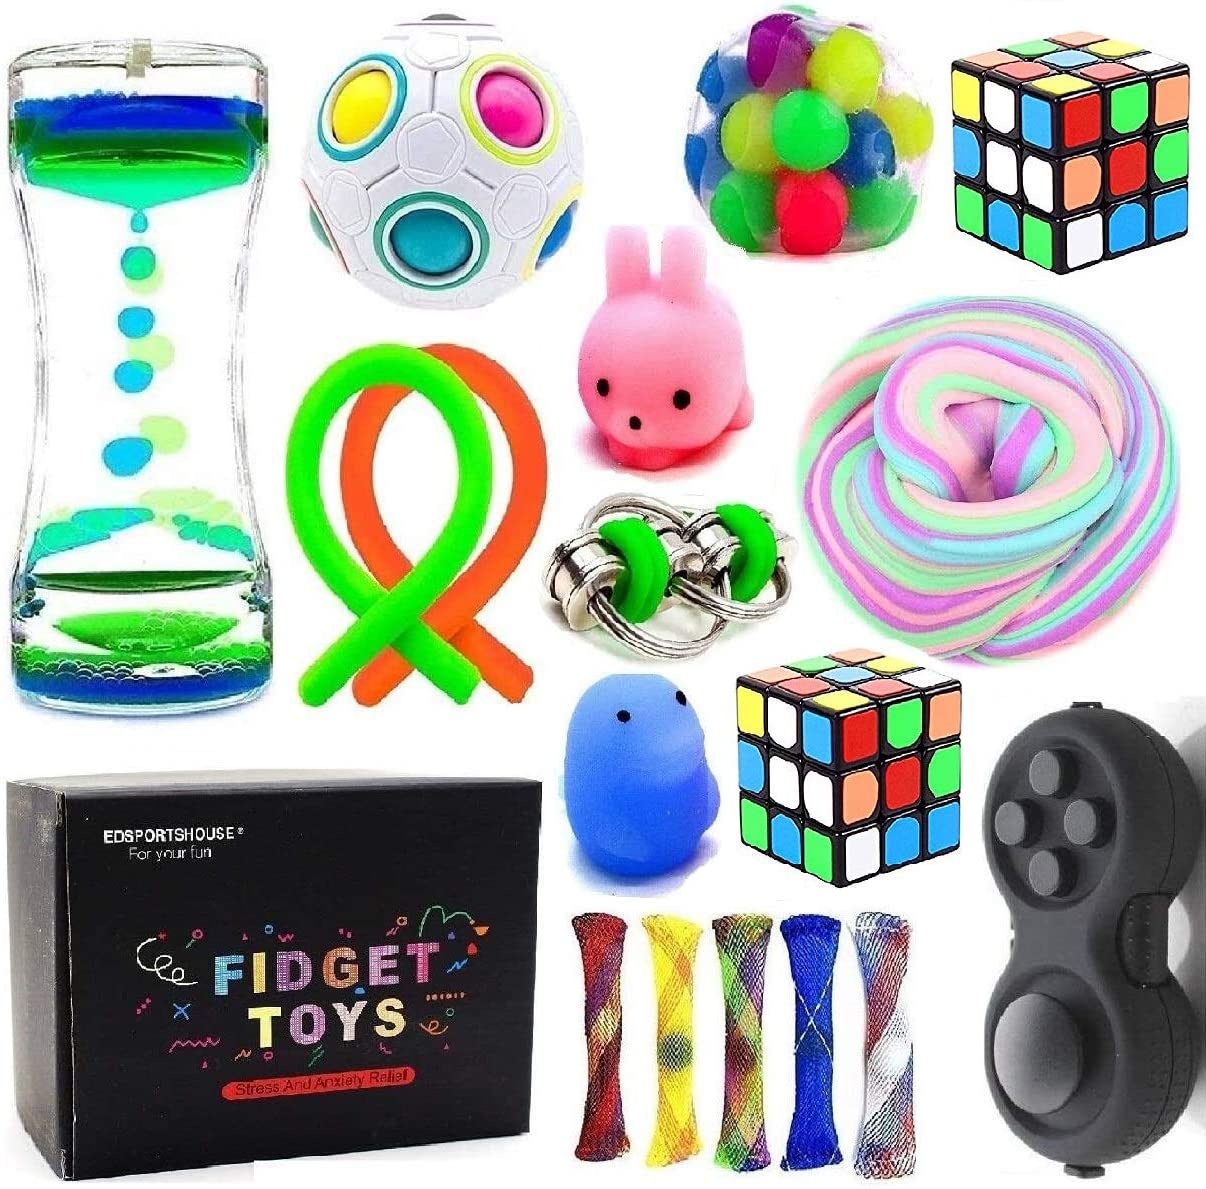 Fidget Cube Fiddle Fingers Stress Relief Finger ADHD Autism Toy Stocking Filler 